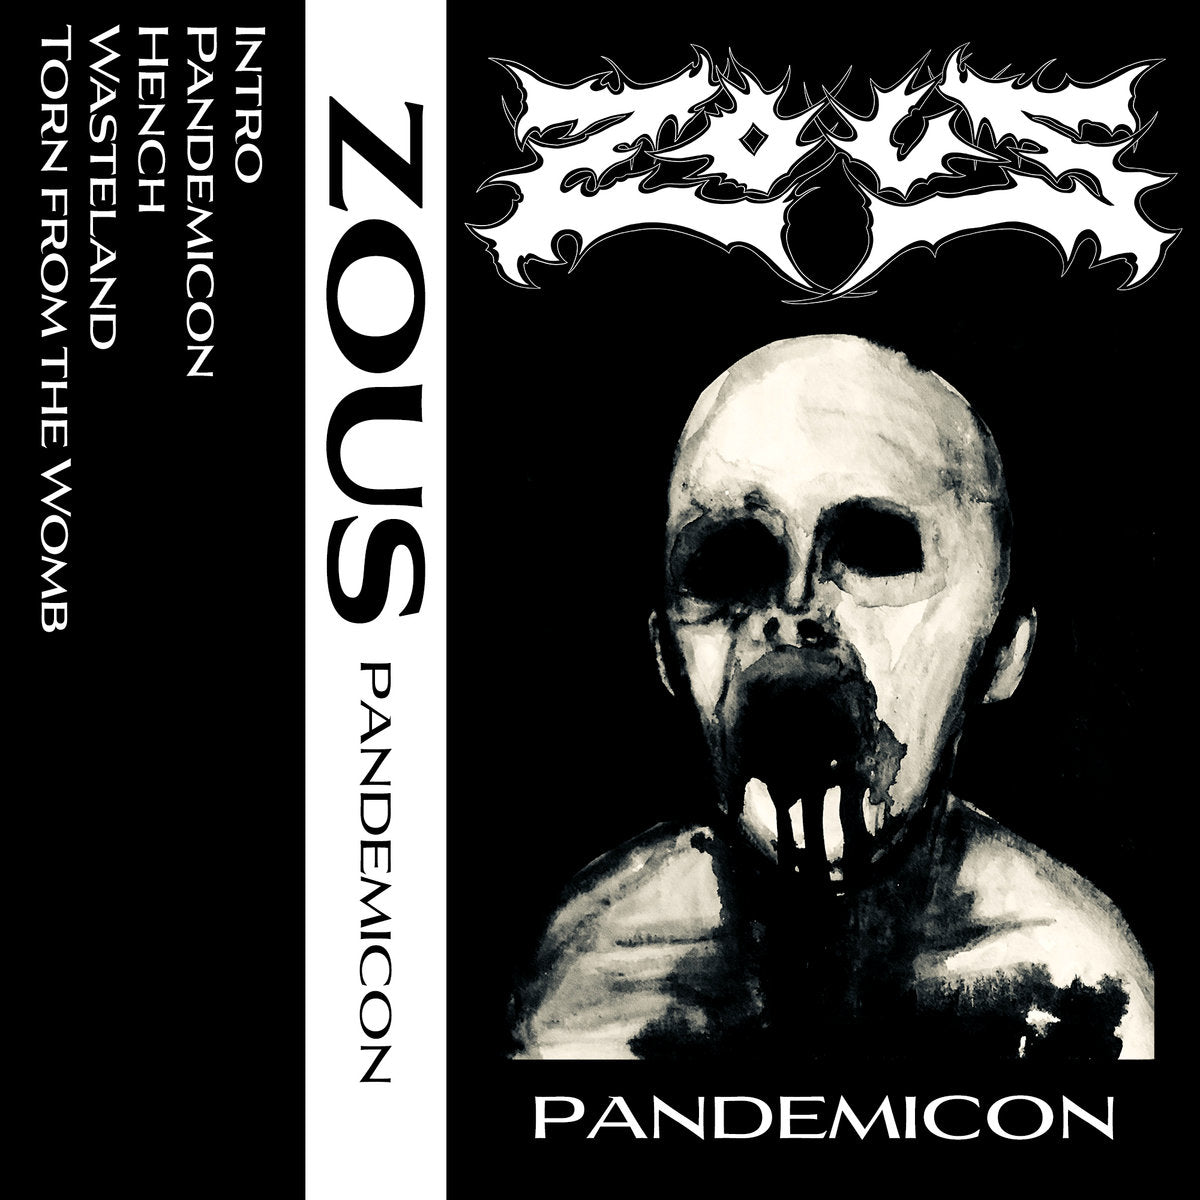 ZOUS "PANDEMICON"